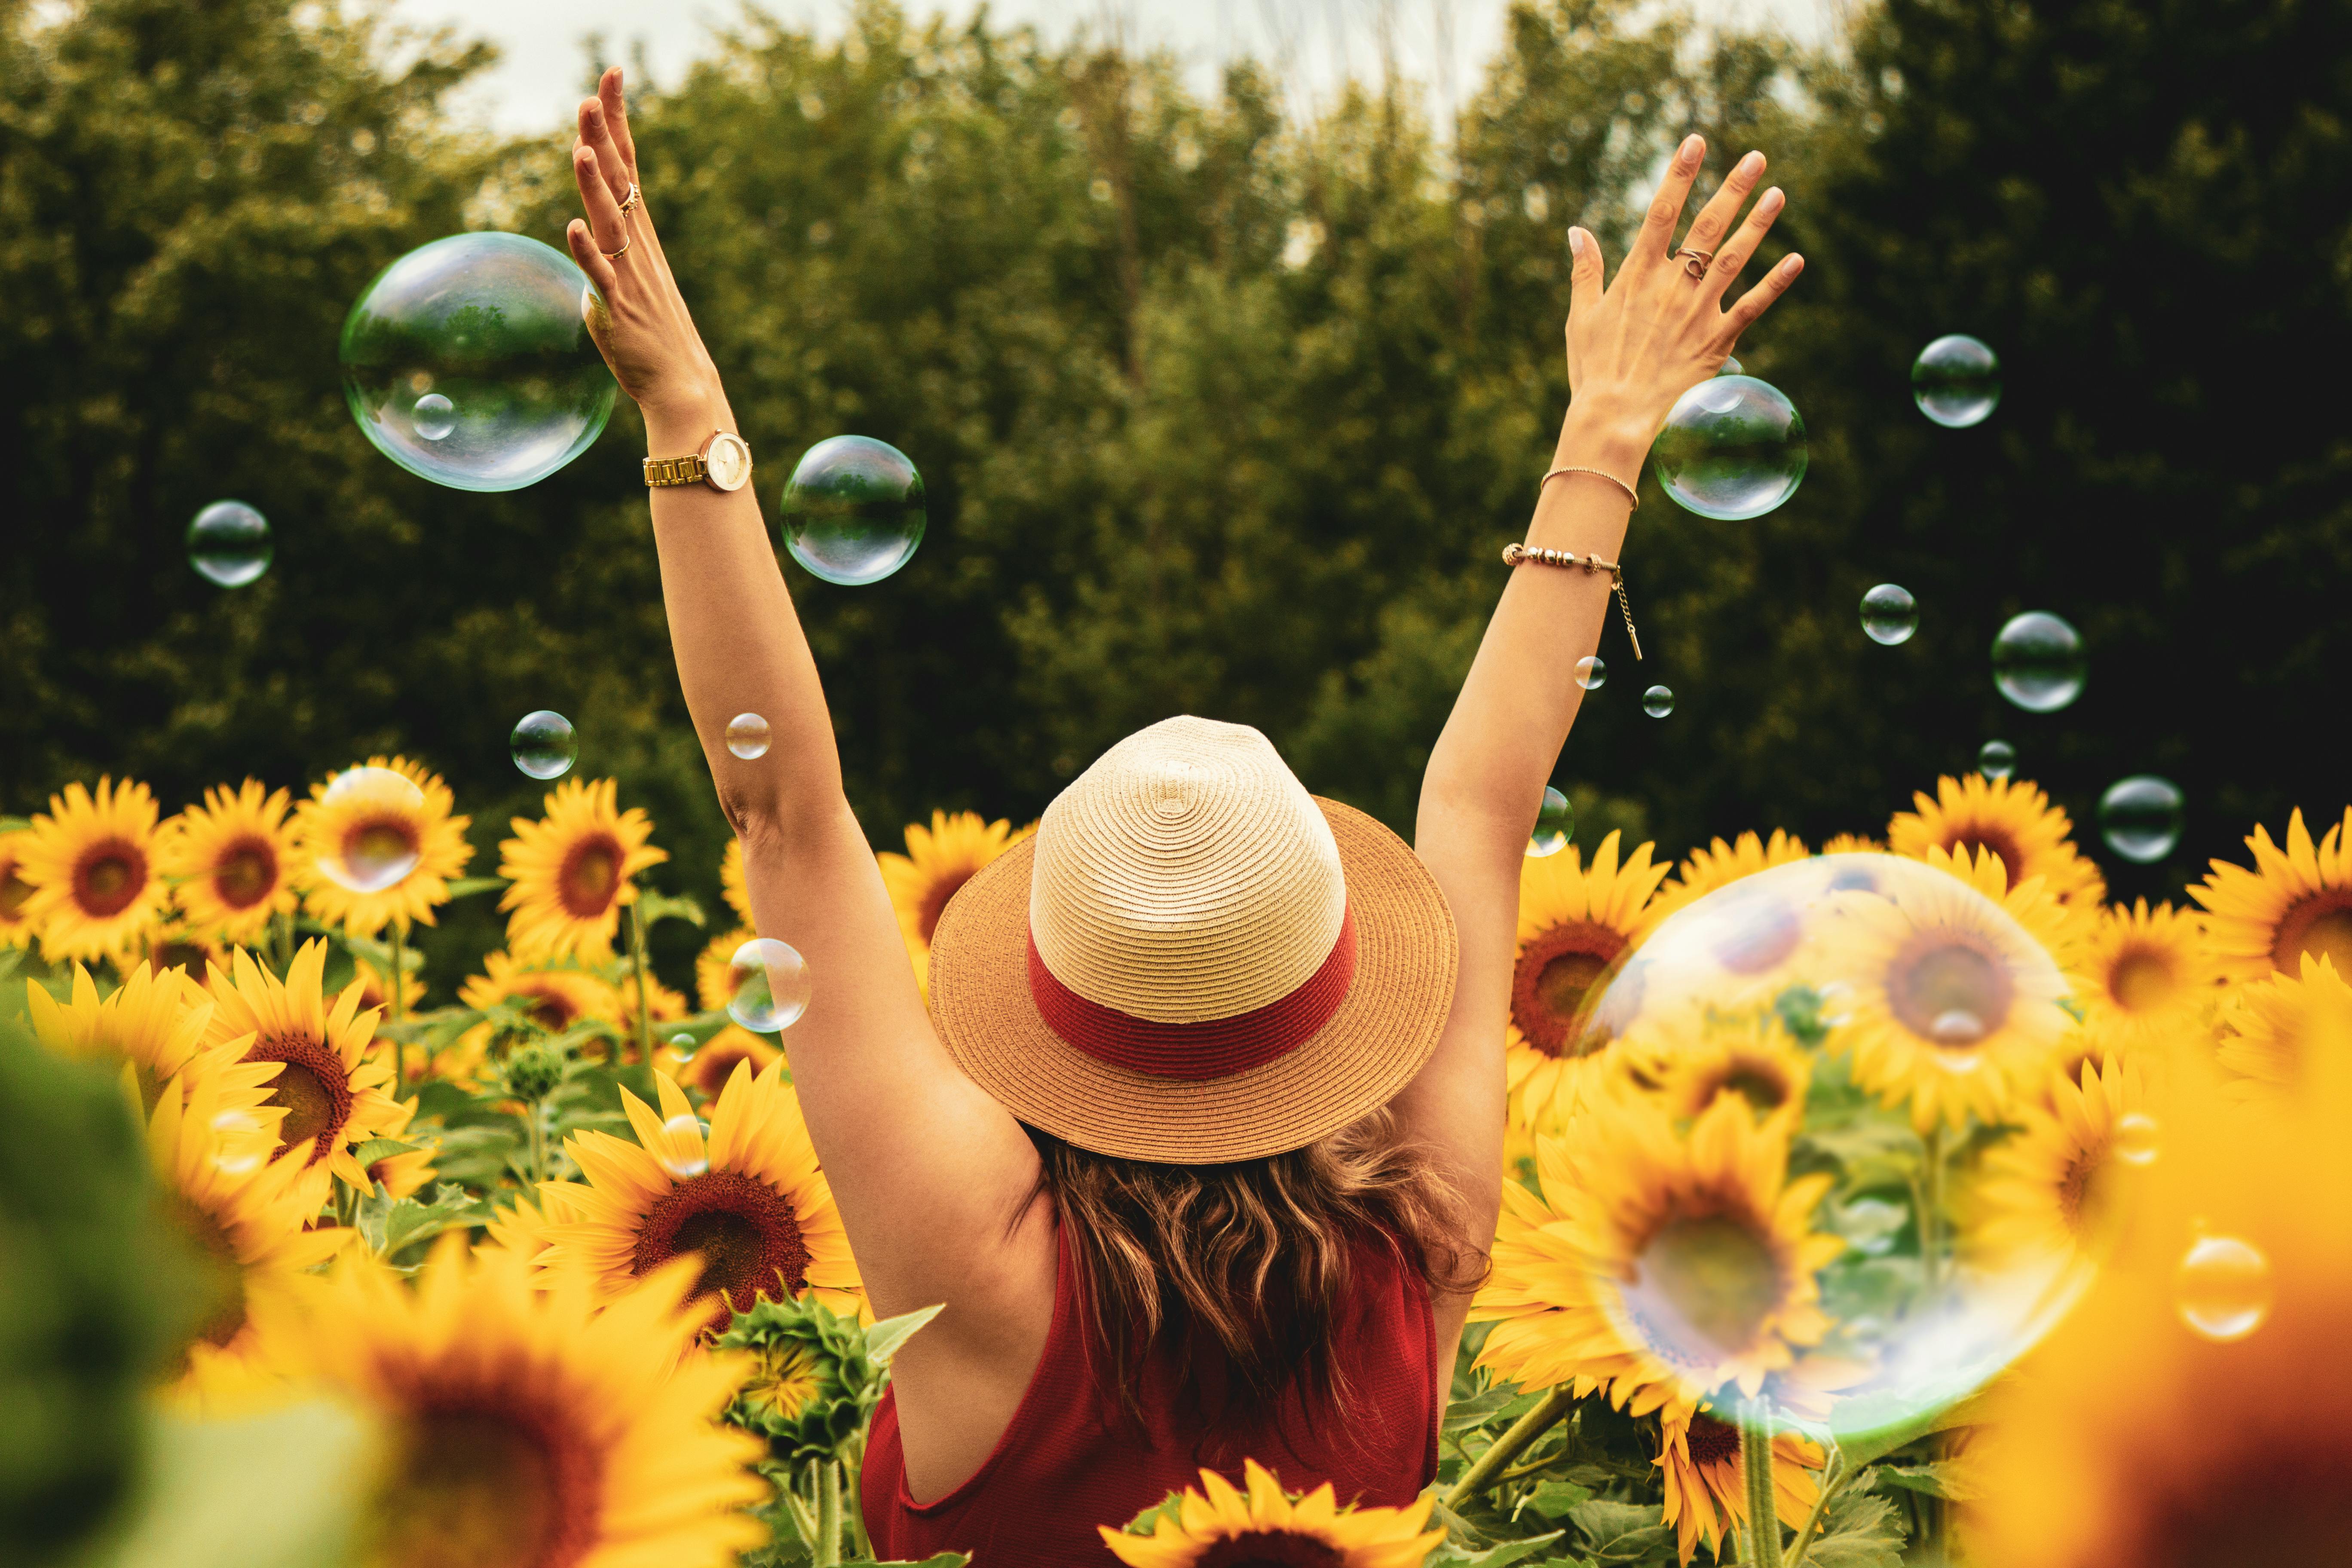 Woman surrounded by sunflowers. | Photo: Pexels